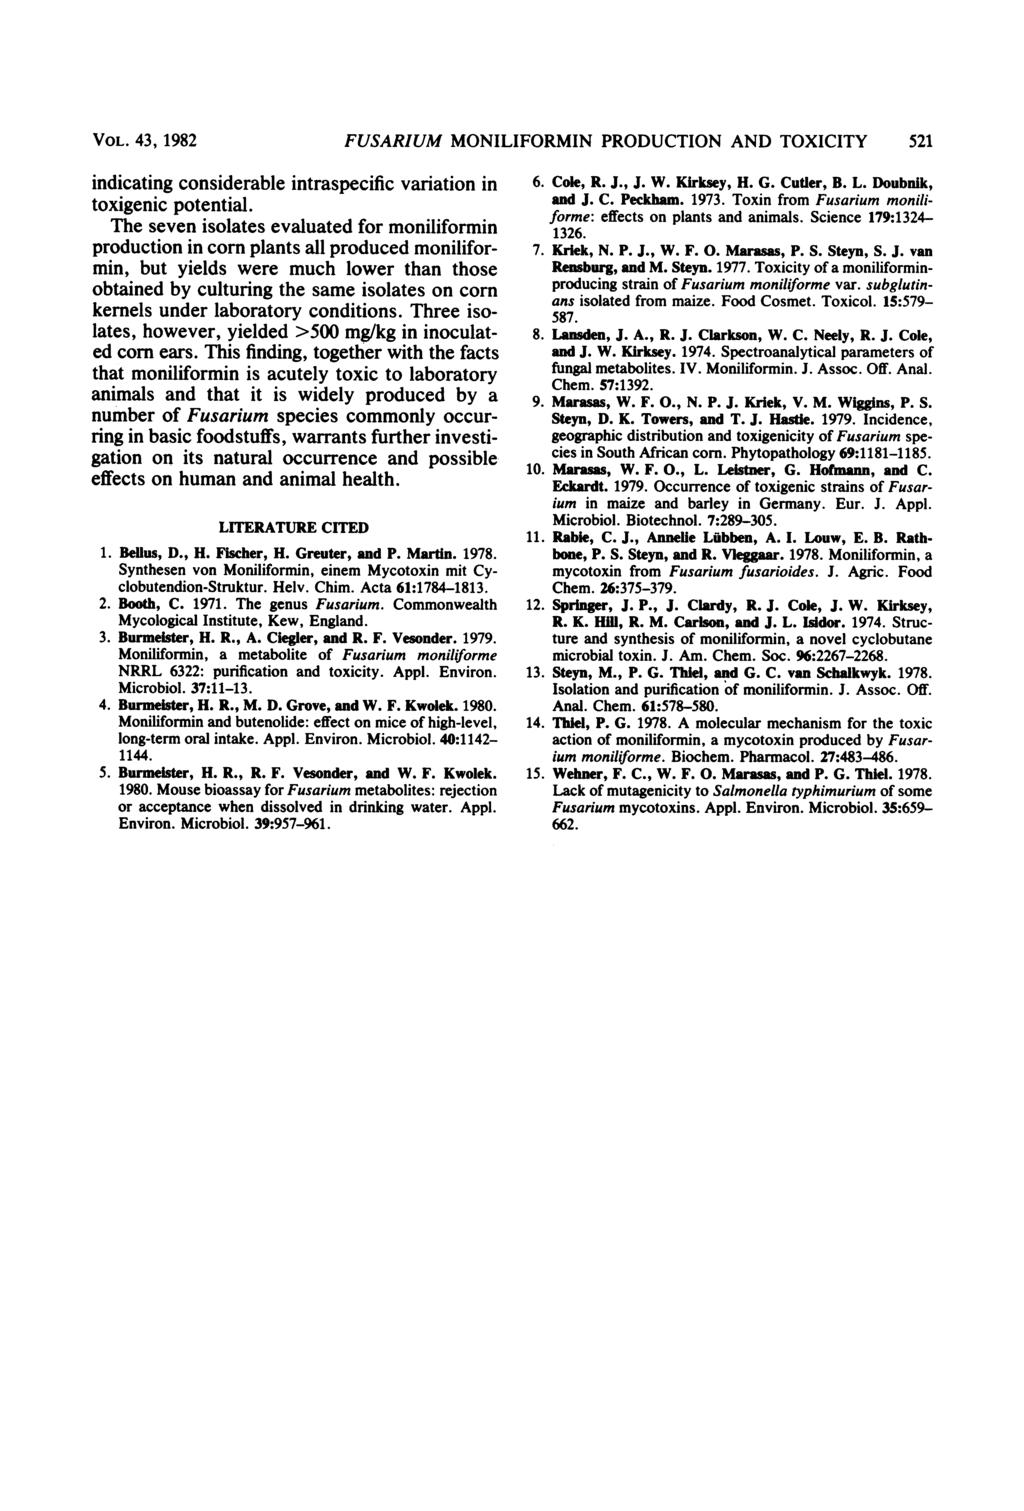 VOL. 43, 1982 indicating considerable intraspecific variation in toxigenic potential.